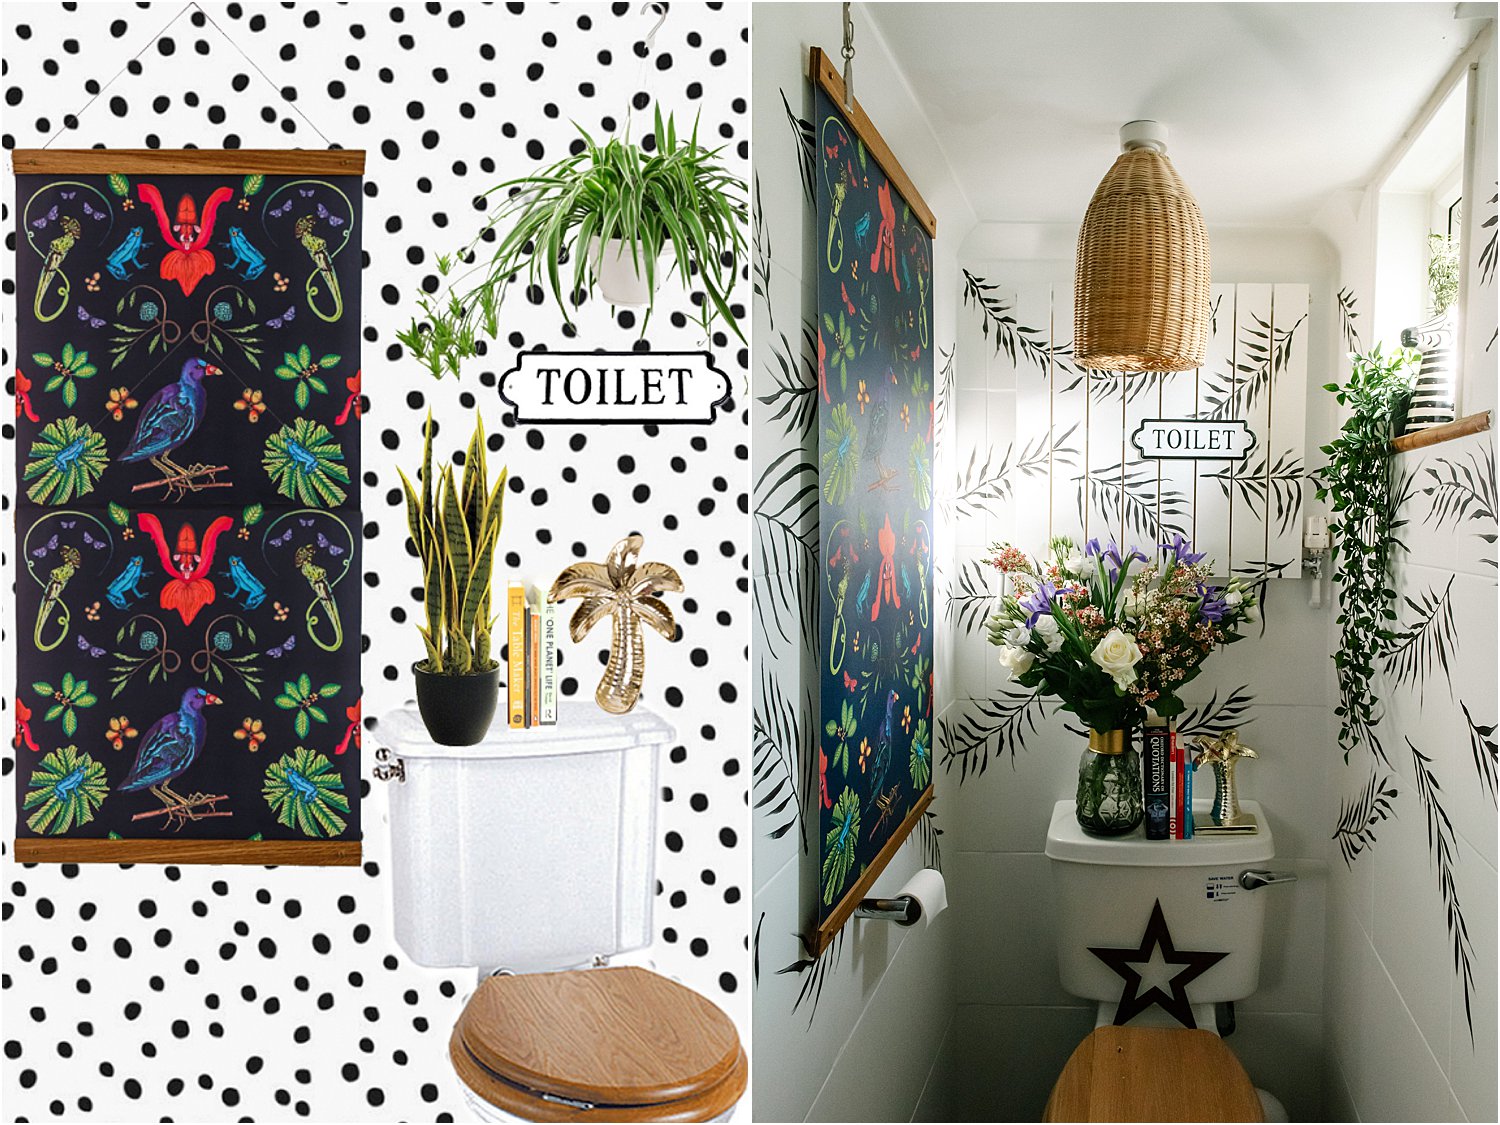 moodboard-toilet-revamp-dull-to-floral-layered-home-interior-design-makeover